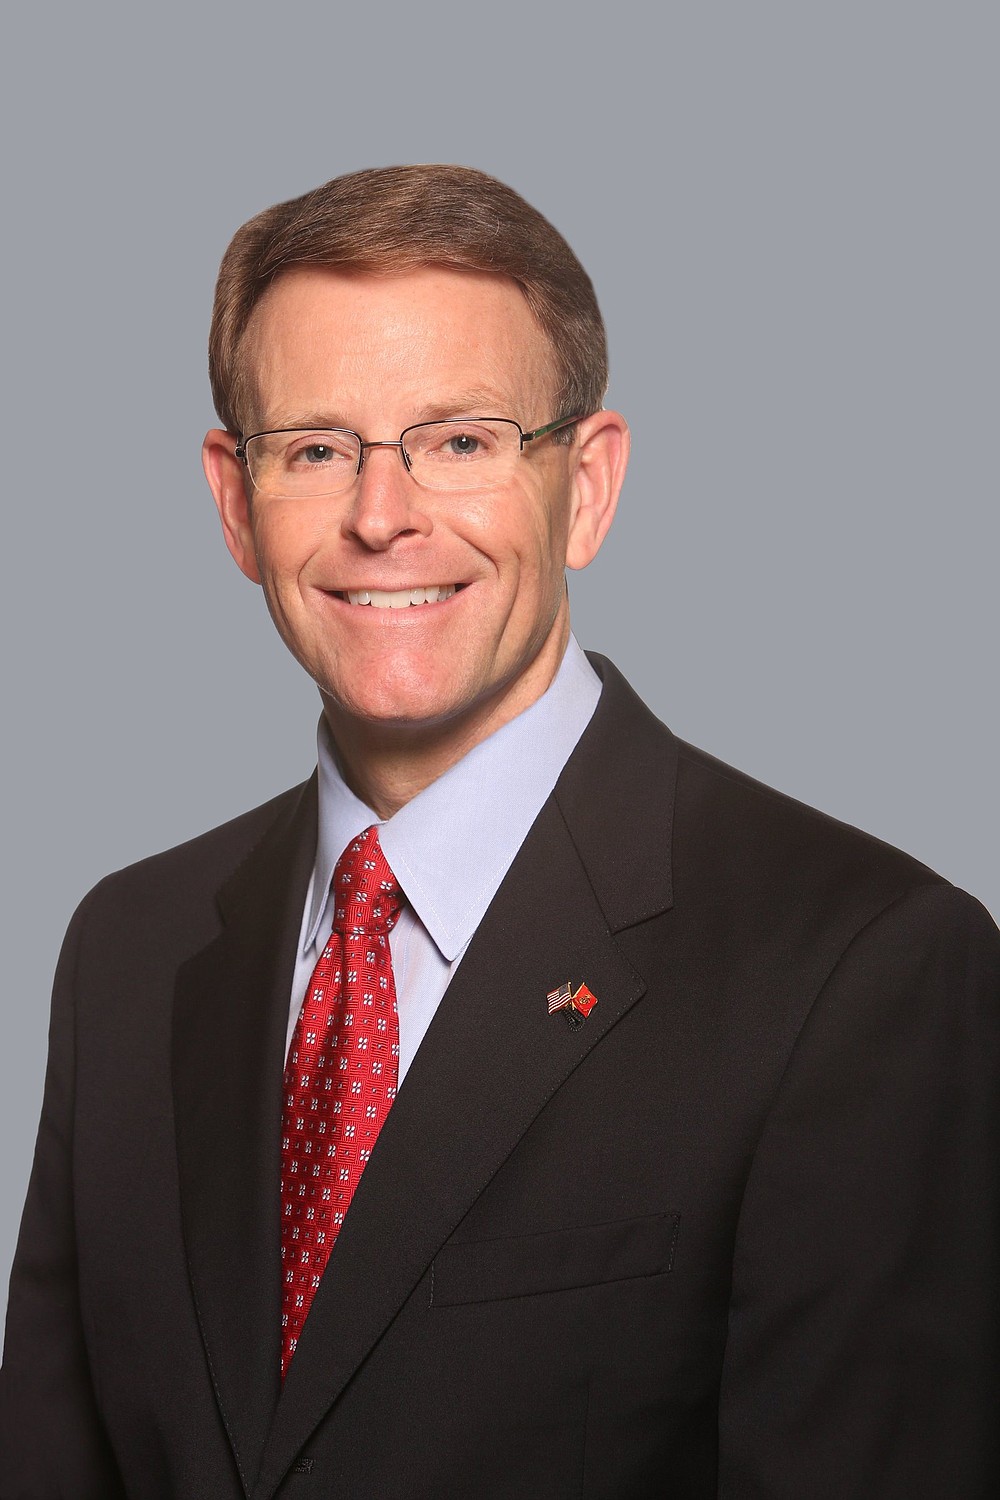 Tony Perkins, member of the United States Commission on International Religious Freedom